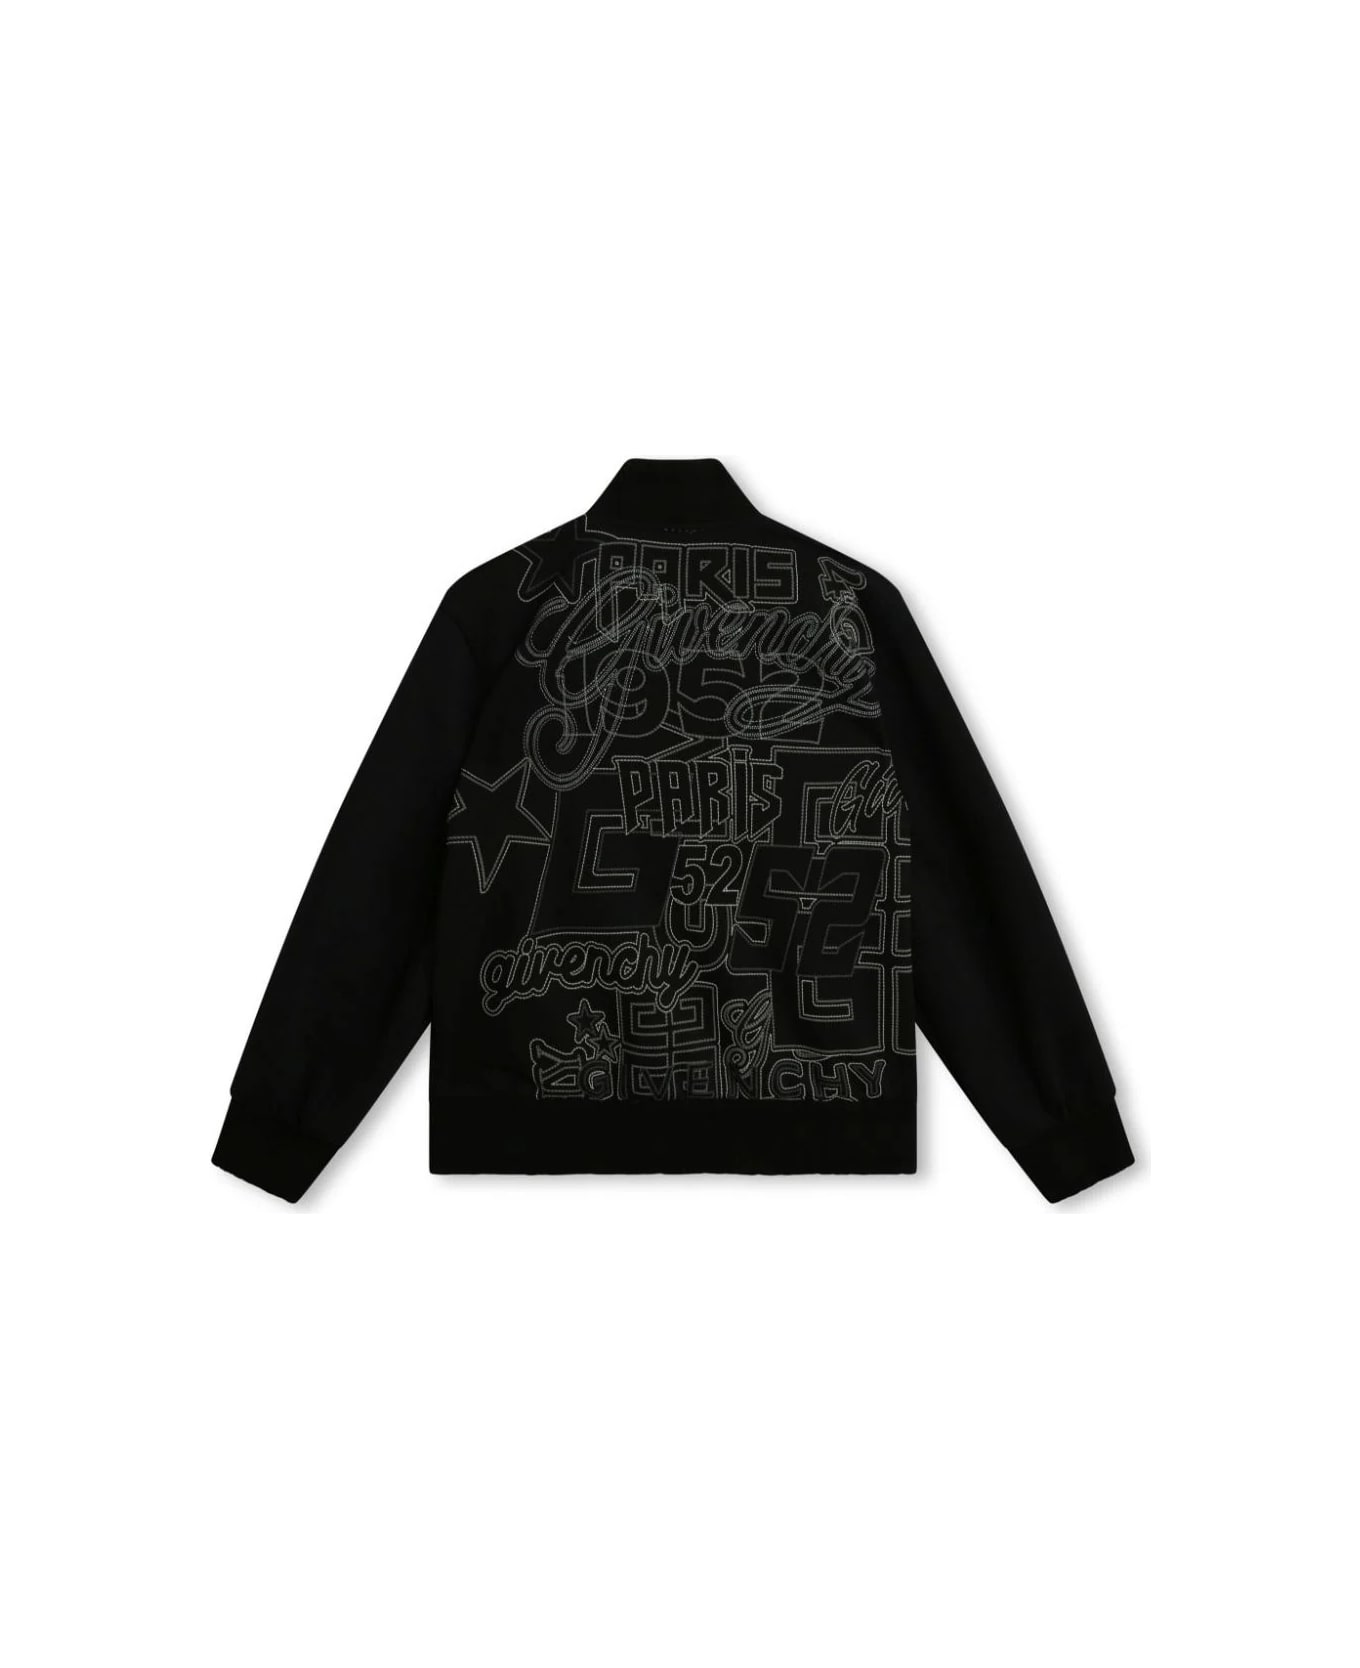 Givenchy Black Bomber Jacket With All-over Embroidery - Black コート＆ジャケット